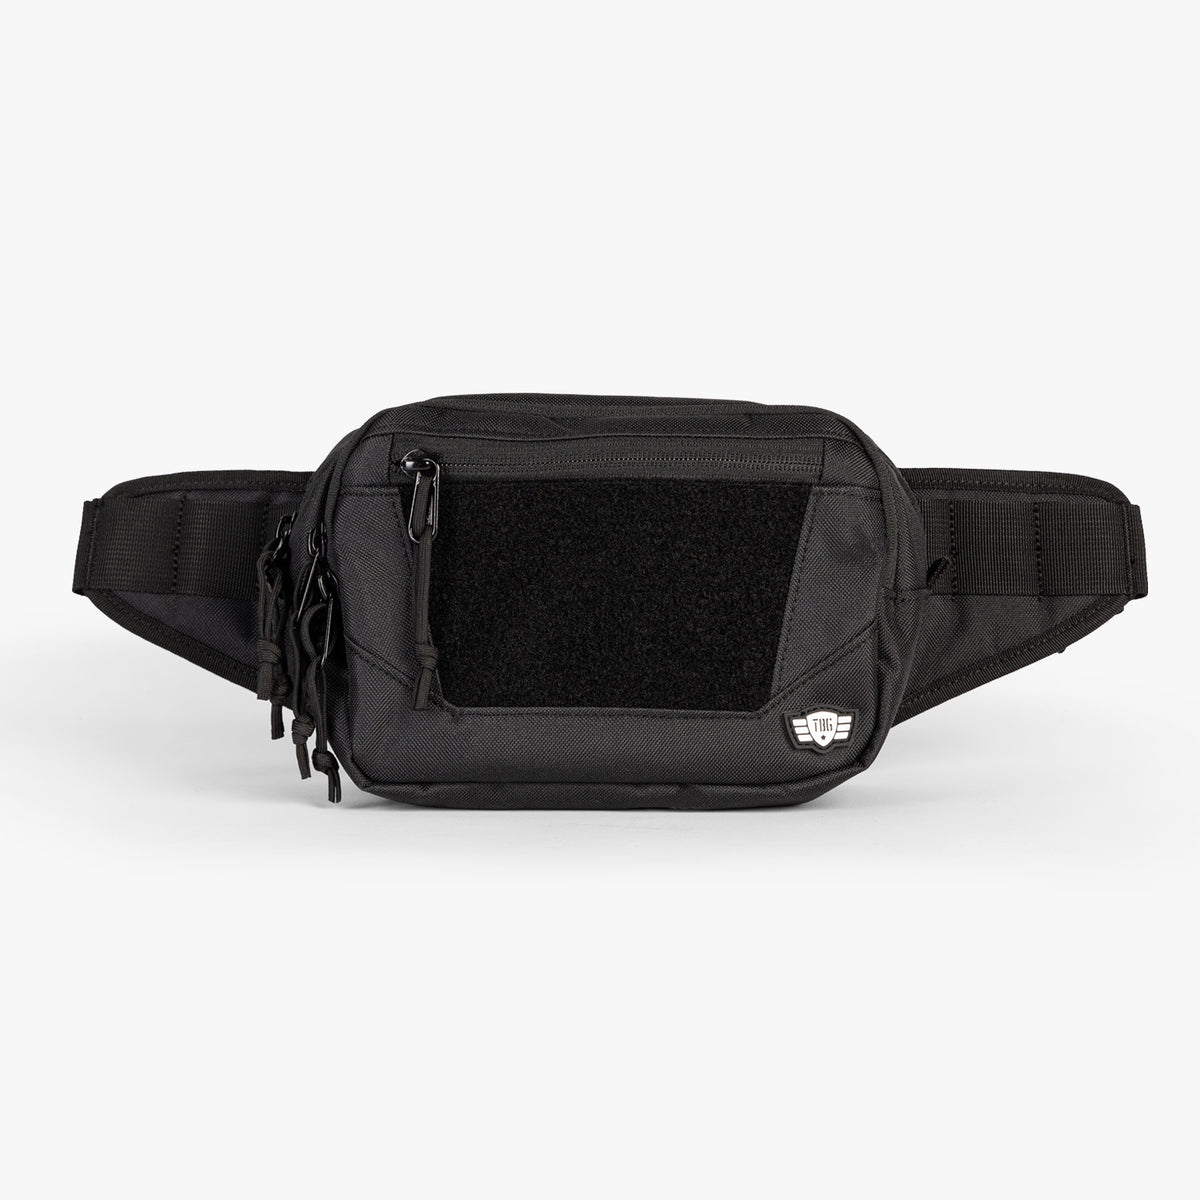 Messenger Bags & Straps - Her Hide Out